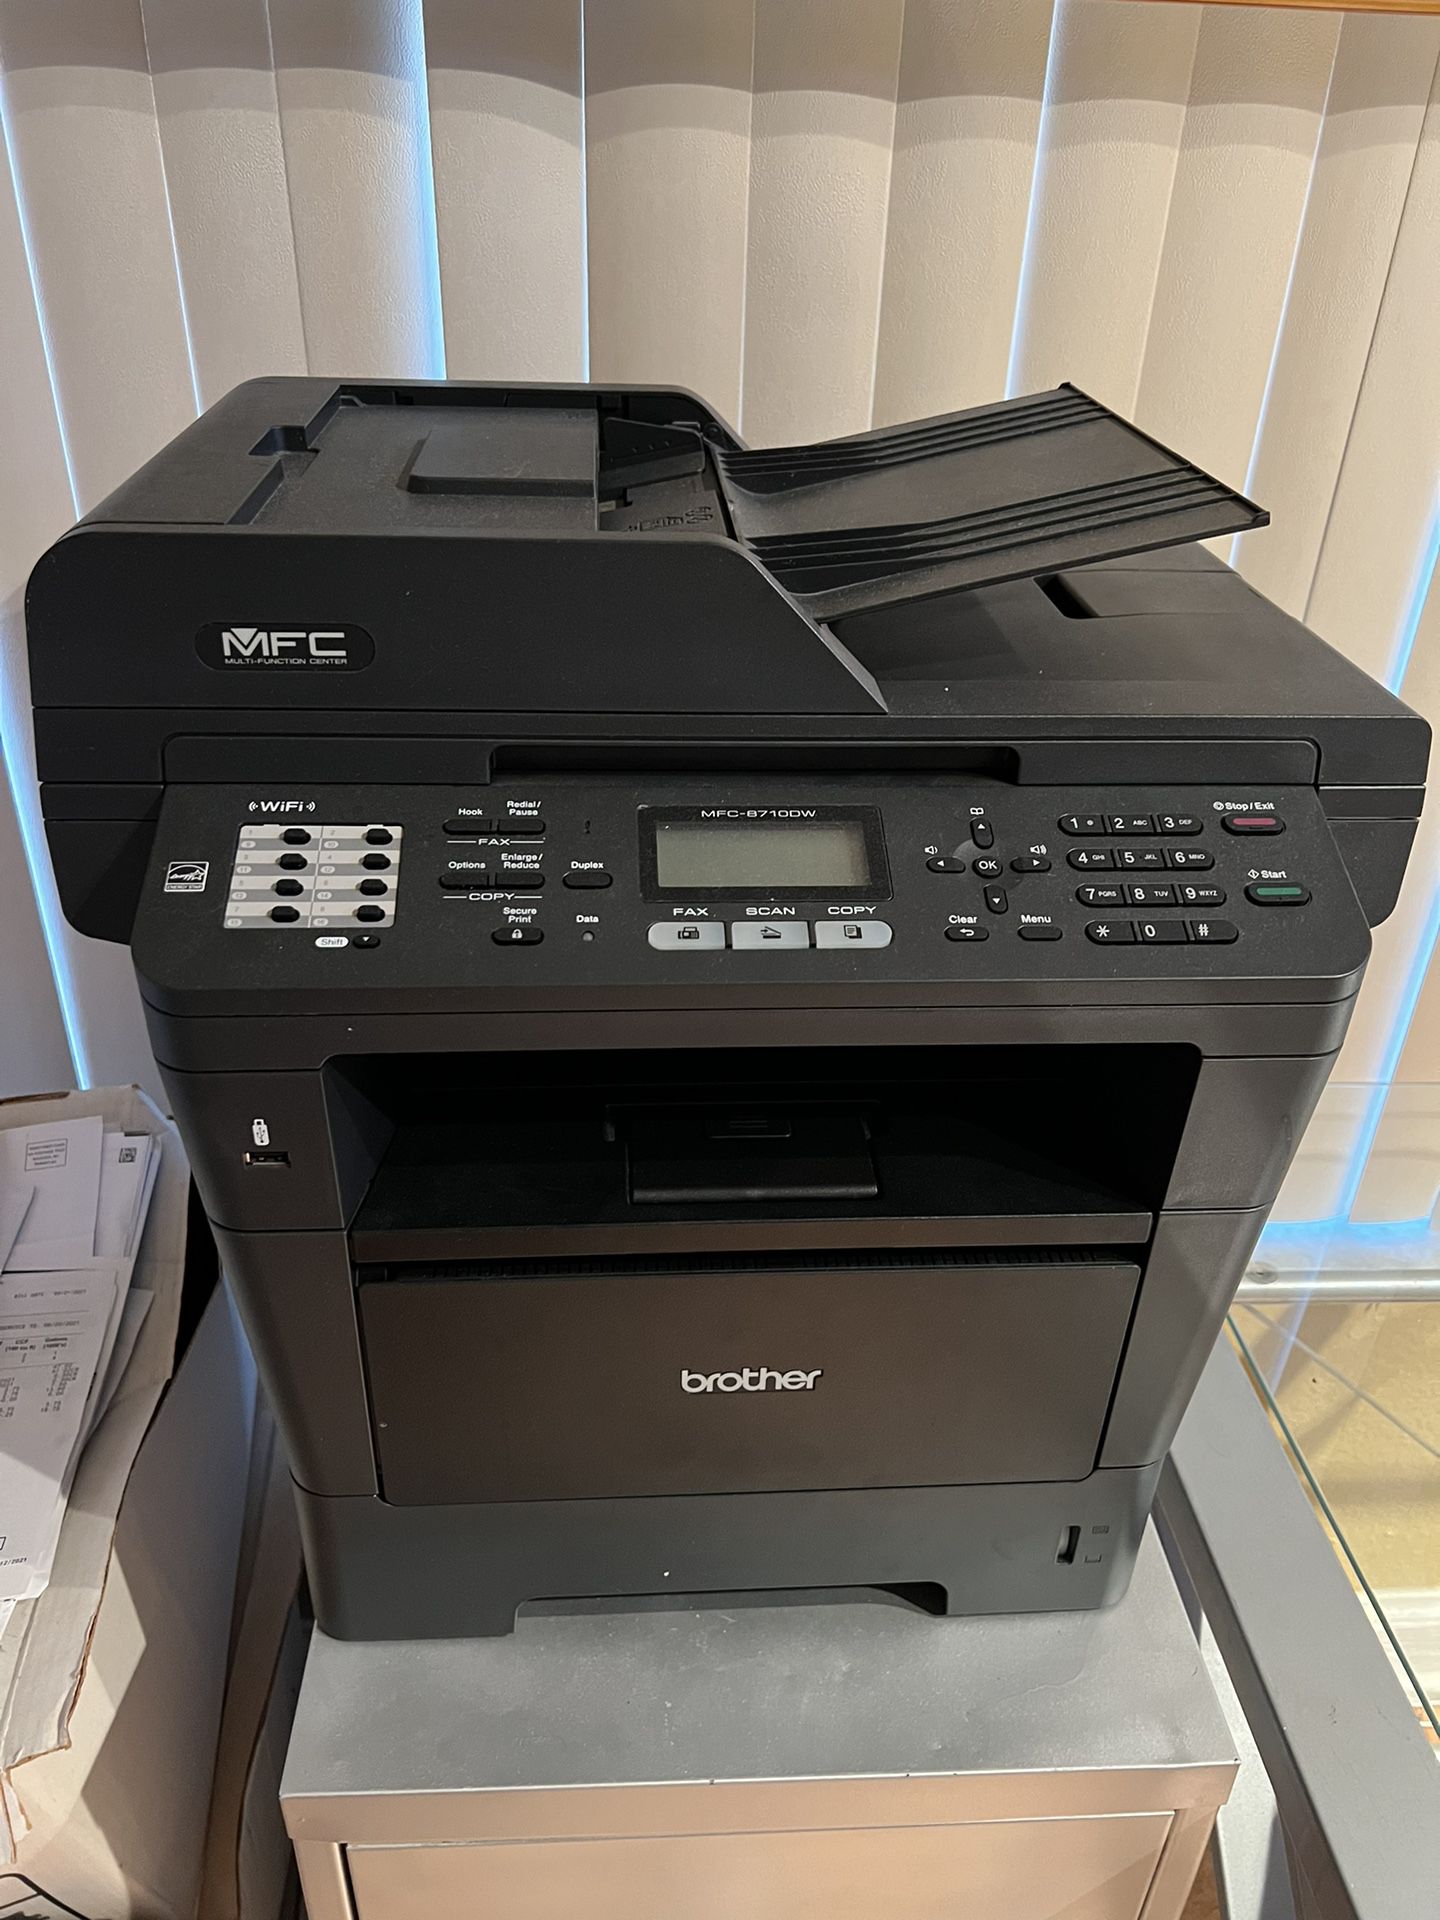 Brother Printer - Scan / Copy / Fax